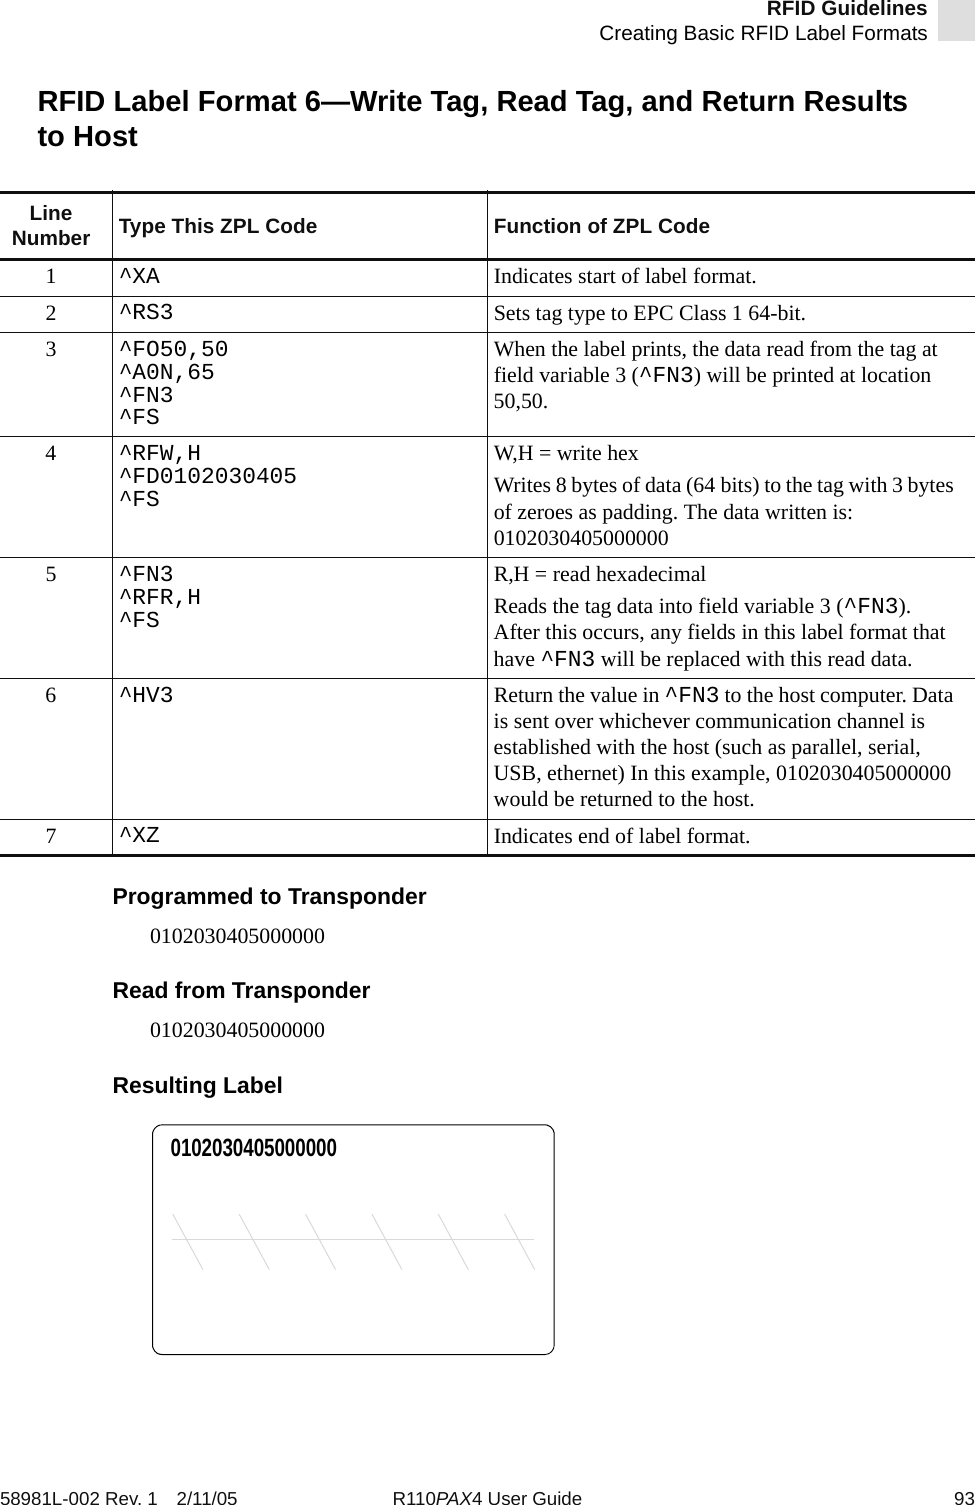 RFID GuidelinesCreating Basic RFID Label Formats58981L-002 Rev. 1 2/11/05 R110PAX4 User Guide 93RFID Label Format 6—Write Tag, Read Tag, and Return Results to HostProgrammed to Transponder0102030405000000Read from Transponder0102030405000000Resulting LabelLine Number Type This ZPL Code Function of ZPL Code1^XA Indicates start of label format.2^RS3 Sets tag type to EPC Class 1 64-bit.3^FO50,50^A0N,65^FN3^FSWhen the label prints, the data read from the tag at field variable 3 (^FN3) will be printed at location  50,50.4^RFW,H^FD0102030405^FSW,H = write hexWrites 8 bytes of data (64 bits) to the tag with 3 bytes of zeroes as padding. The data written is: 01020304050000005^FN3^RFR,H^FSR,H = read hexadecimalReads the tag data into field variable 3 (^FN3). After this occurs, any fields in this label format that have ^FN3 will be replaced with this read data.6^HV3 Return the value in ^FN3 to the host computer. Data is sent over whichever communication channel is established with the host (such as parallel, serial, USB, ethernet) In this example, 0102030405000000 would be returned to the host.7^XZ Indicates end of label format.0102030405000000